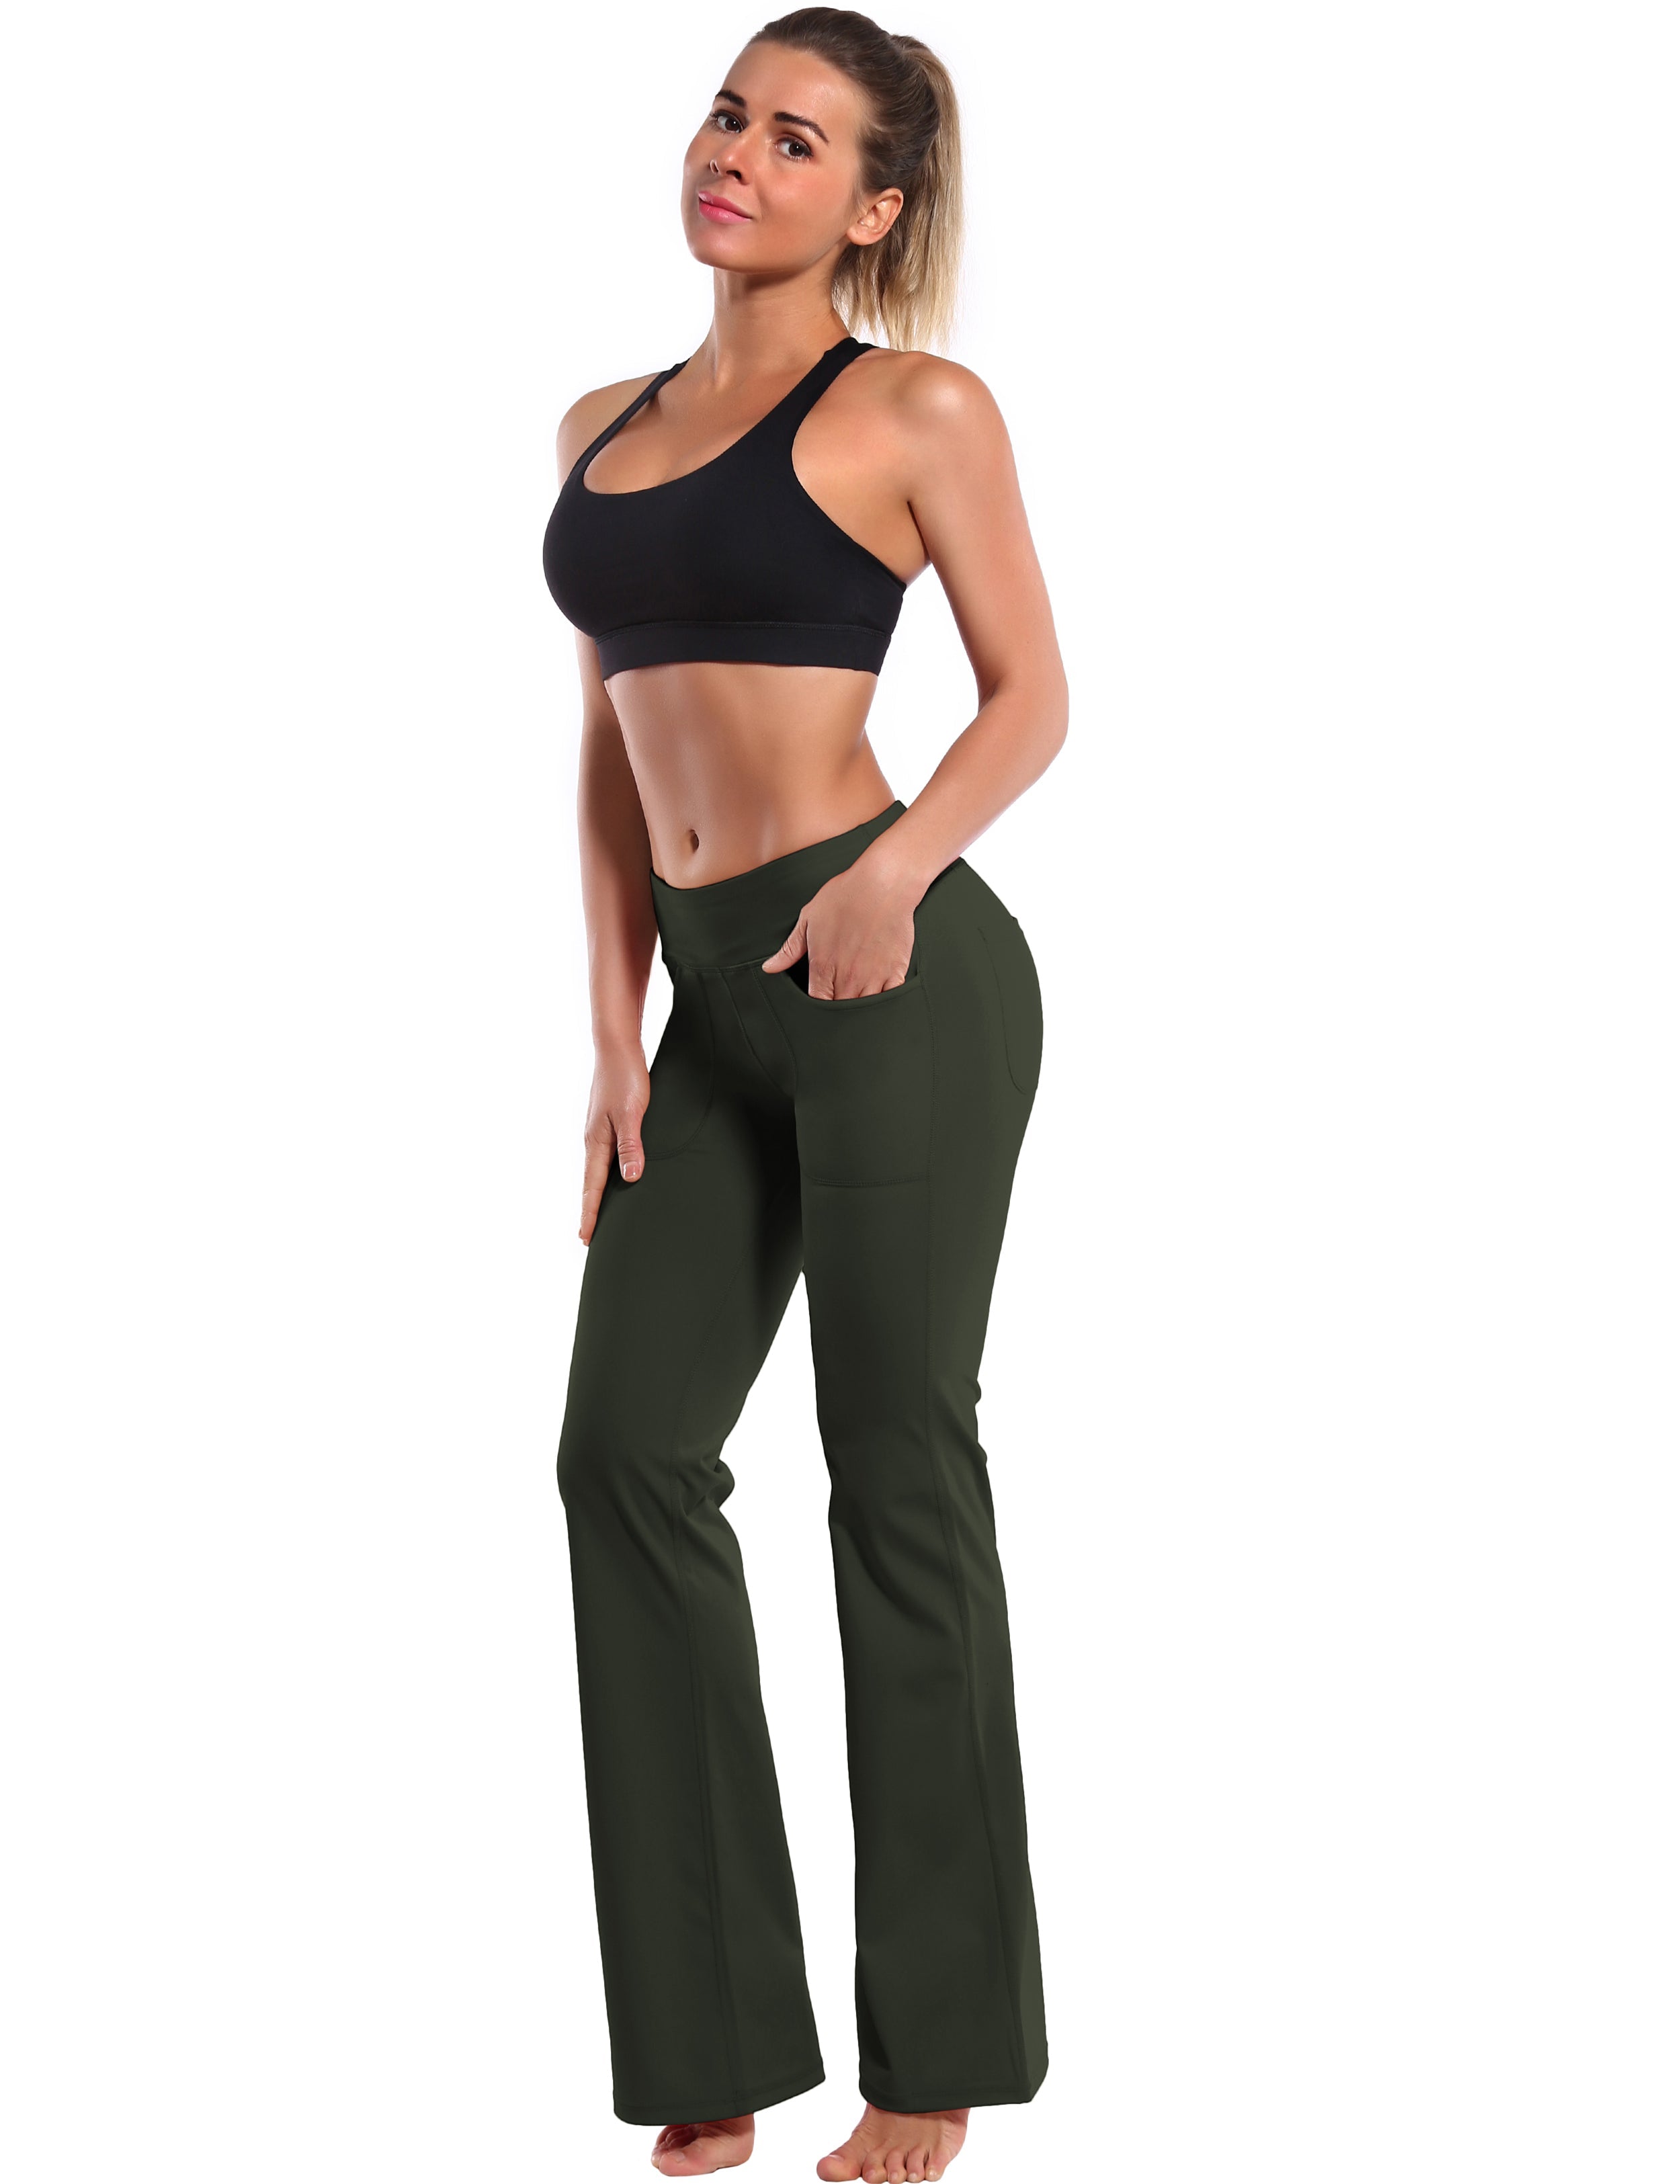 4 Pockets Bootcut Leggings olivegray 75%Nylon/25%Spandex Fabric doesn't attract lint easily 4-way stretch No see-through Moisture-wicking Inner pocket Four lengths